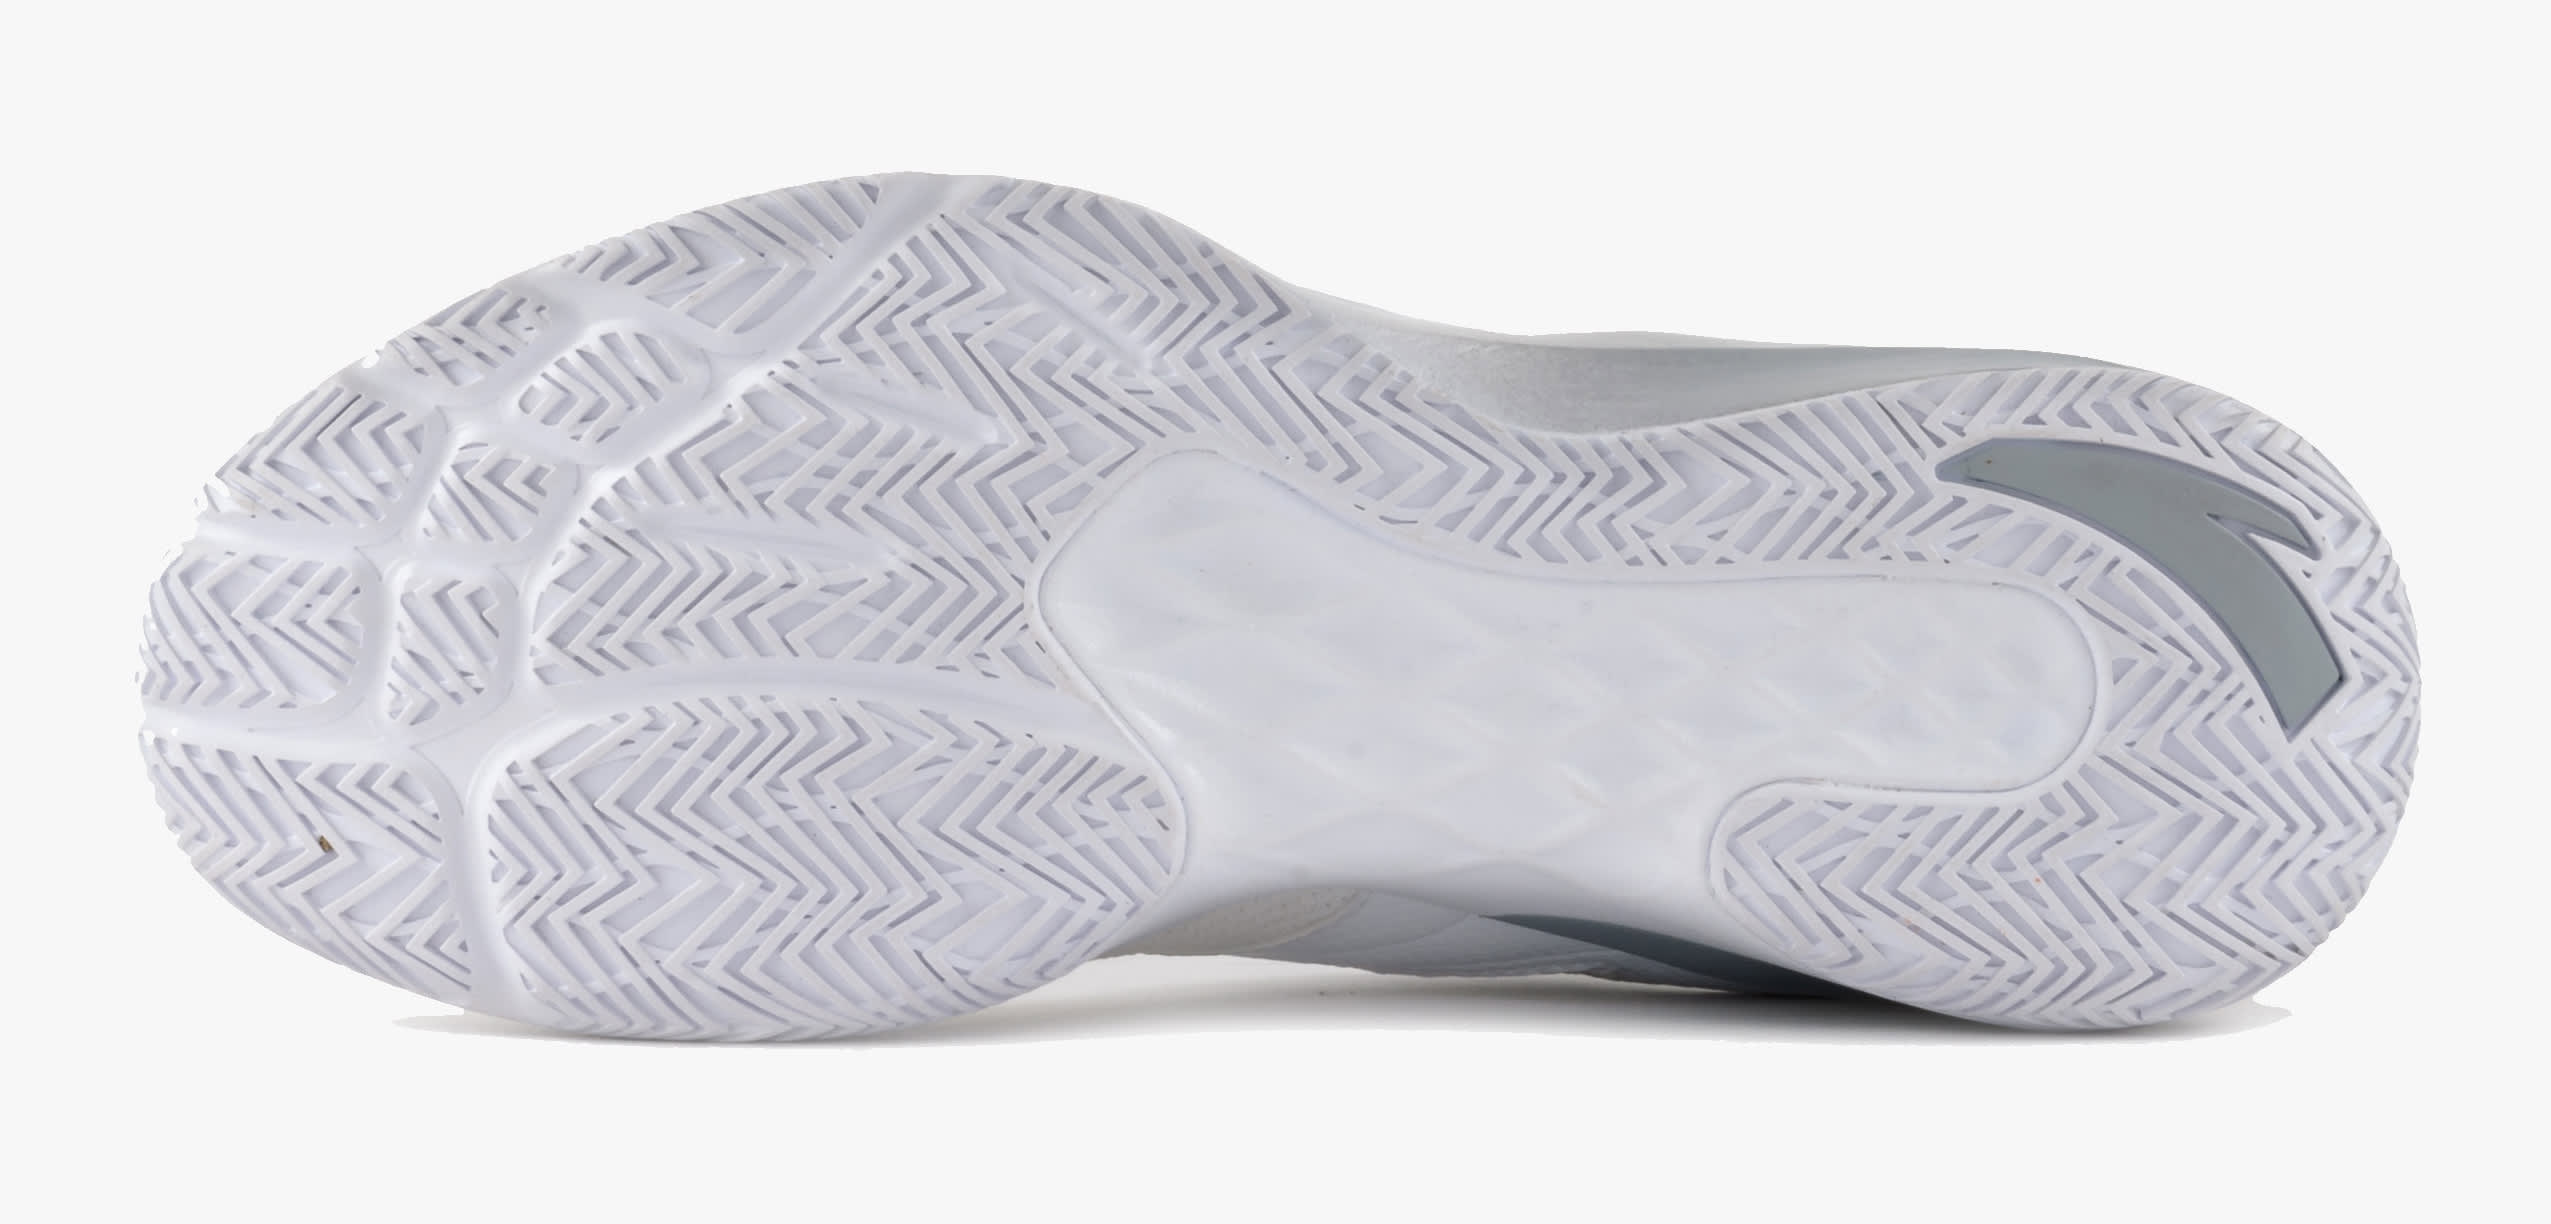 Anta Klay Thompson Chef Curry White Sole